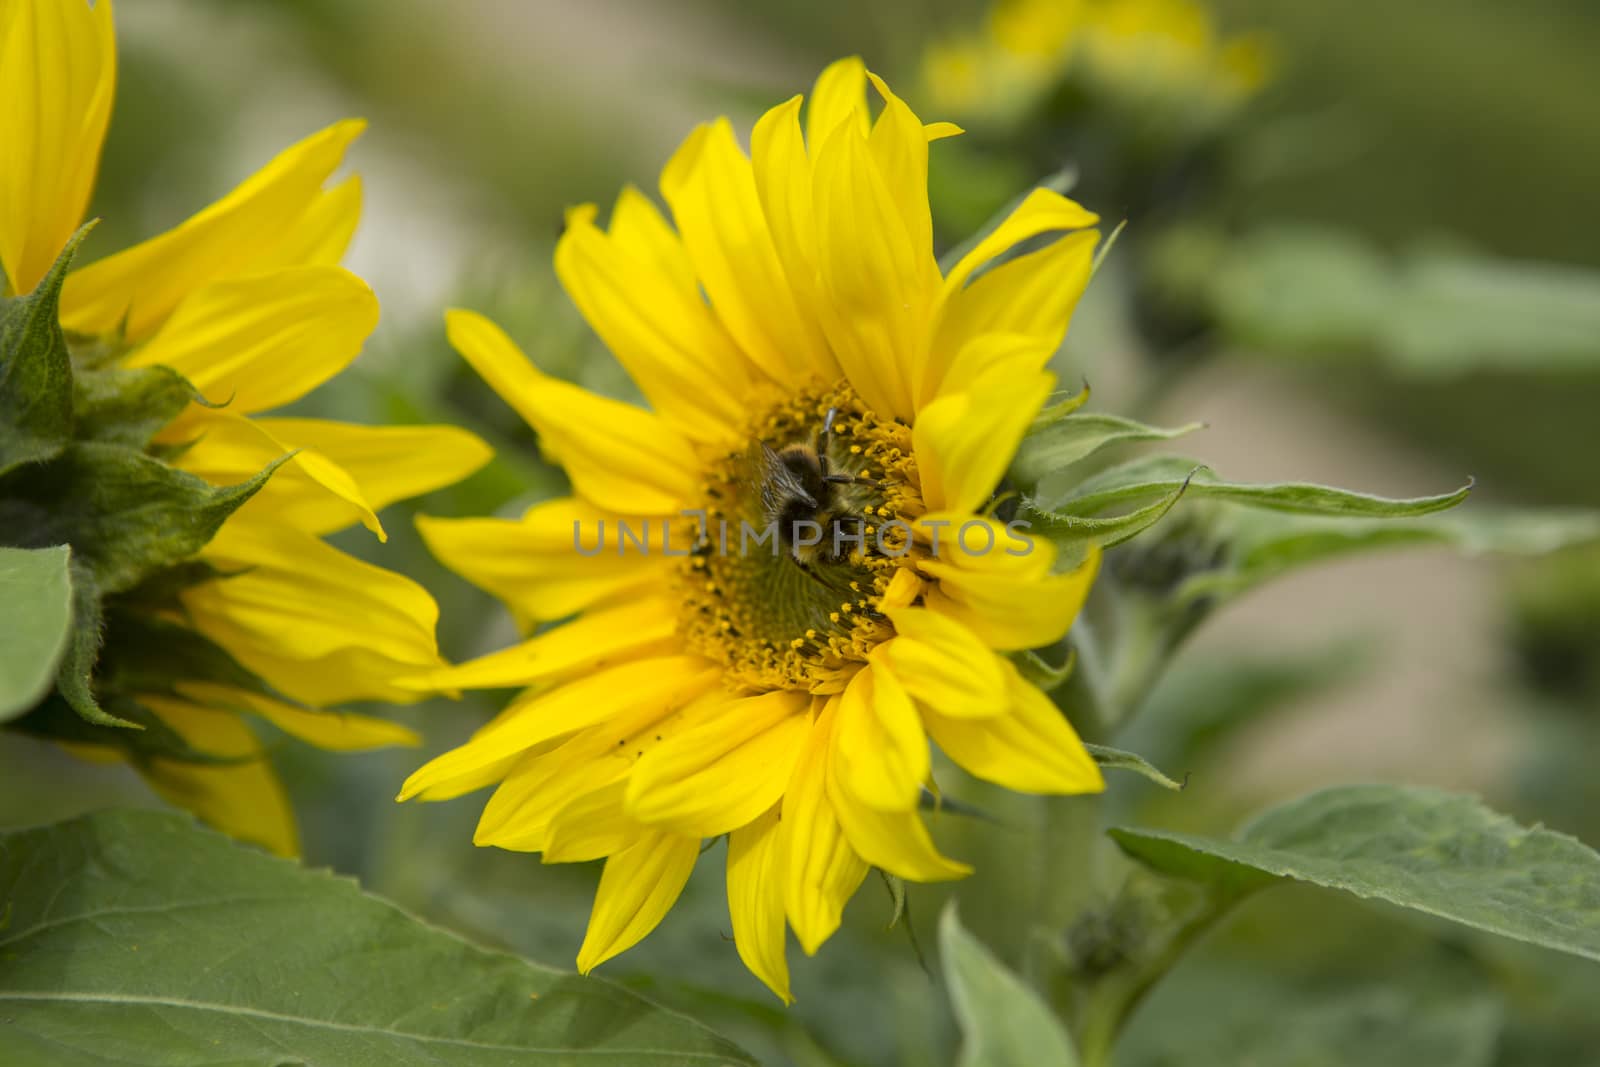 A bumble bee harvesting pollen from a sunflower